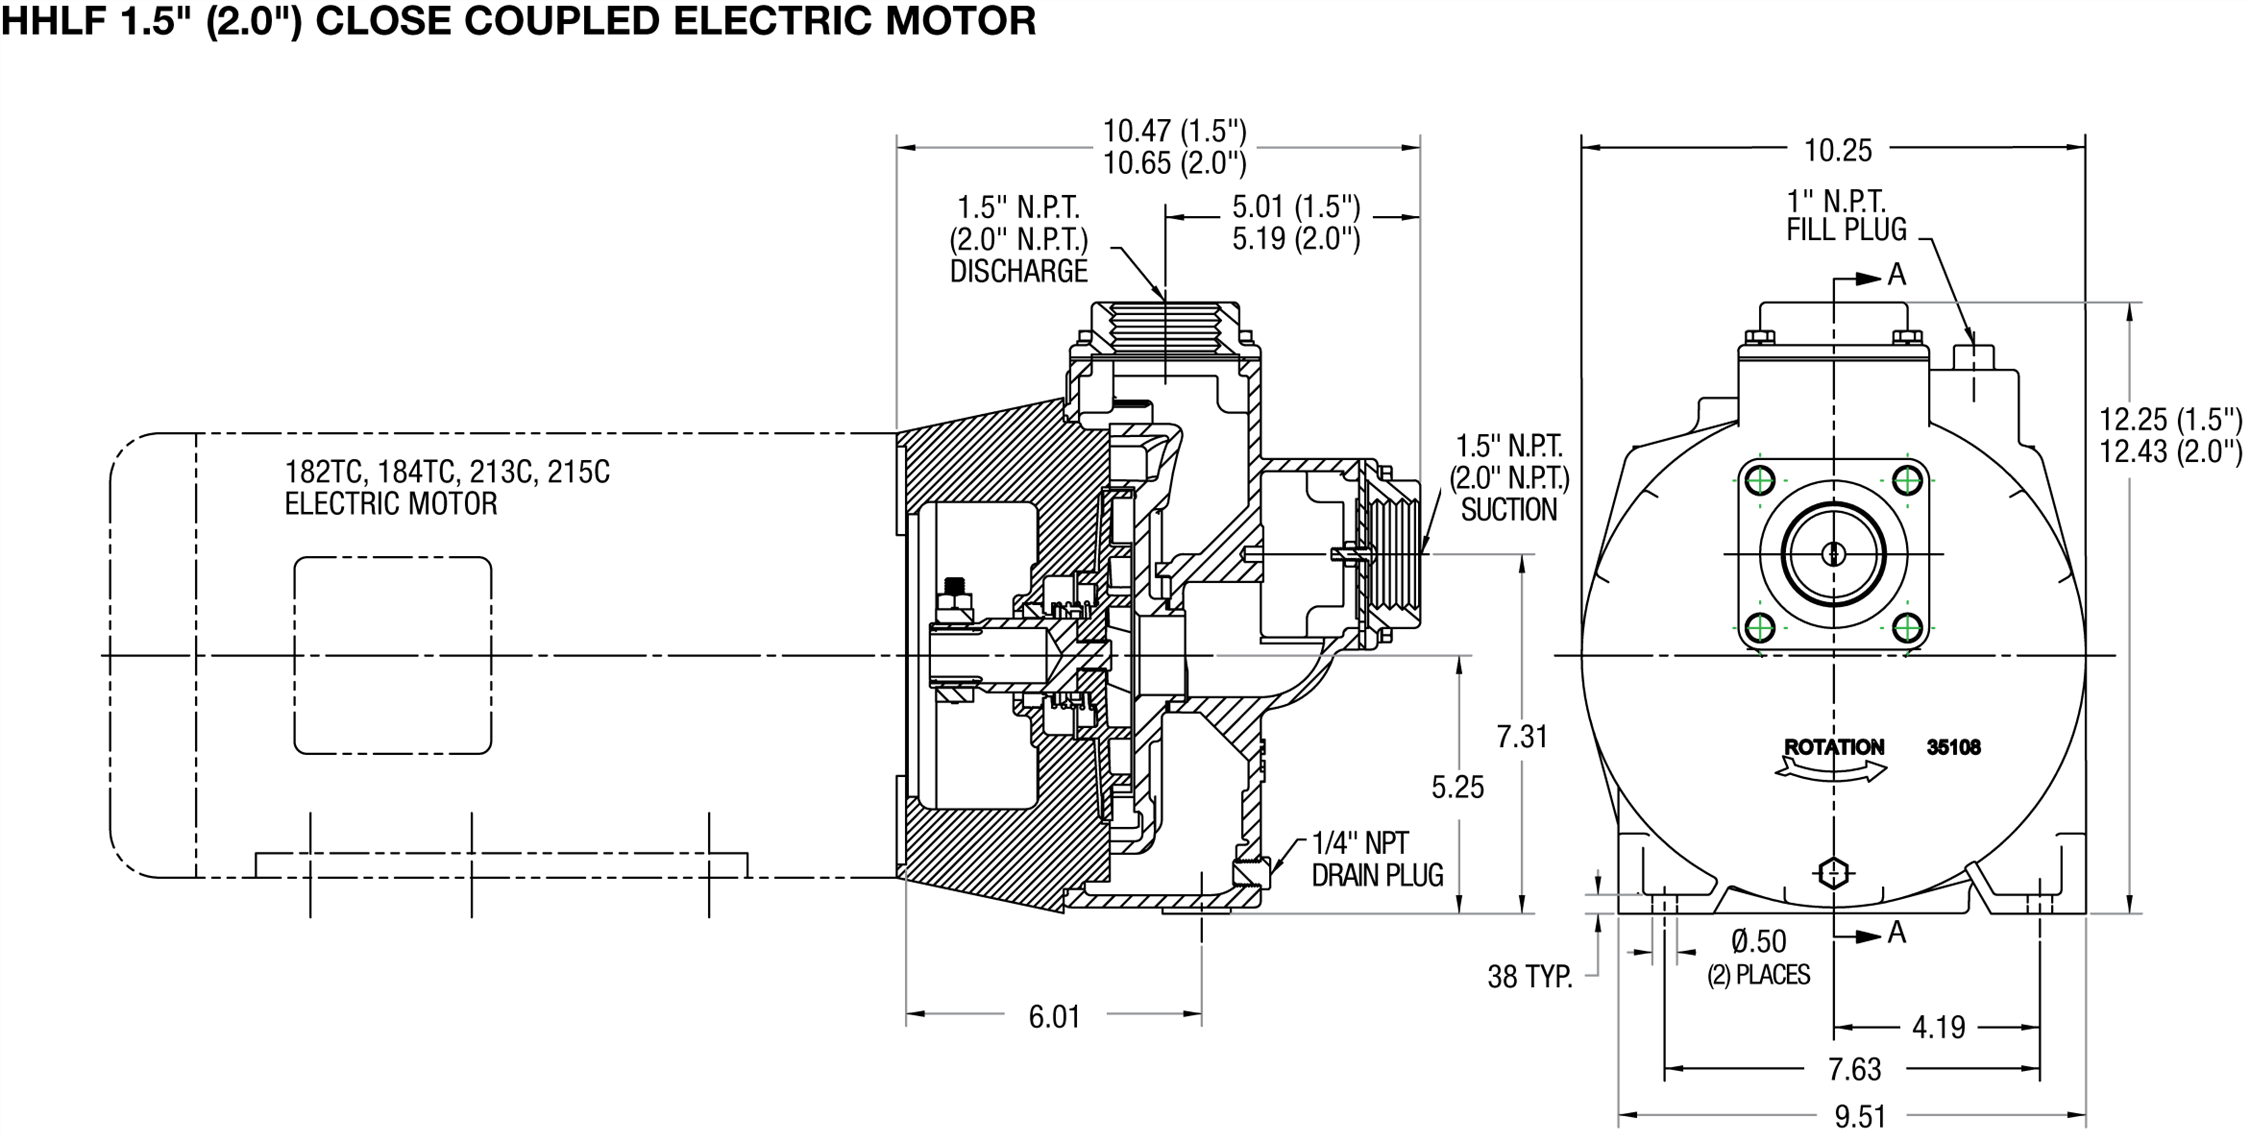 hhlf-high-pressure-water-pump_drawing-hhlf-close-coupled-electric-motor